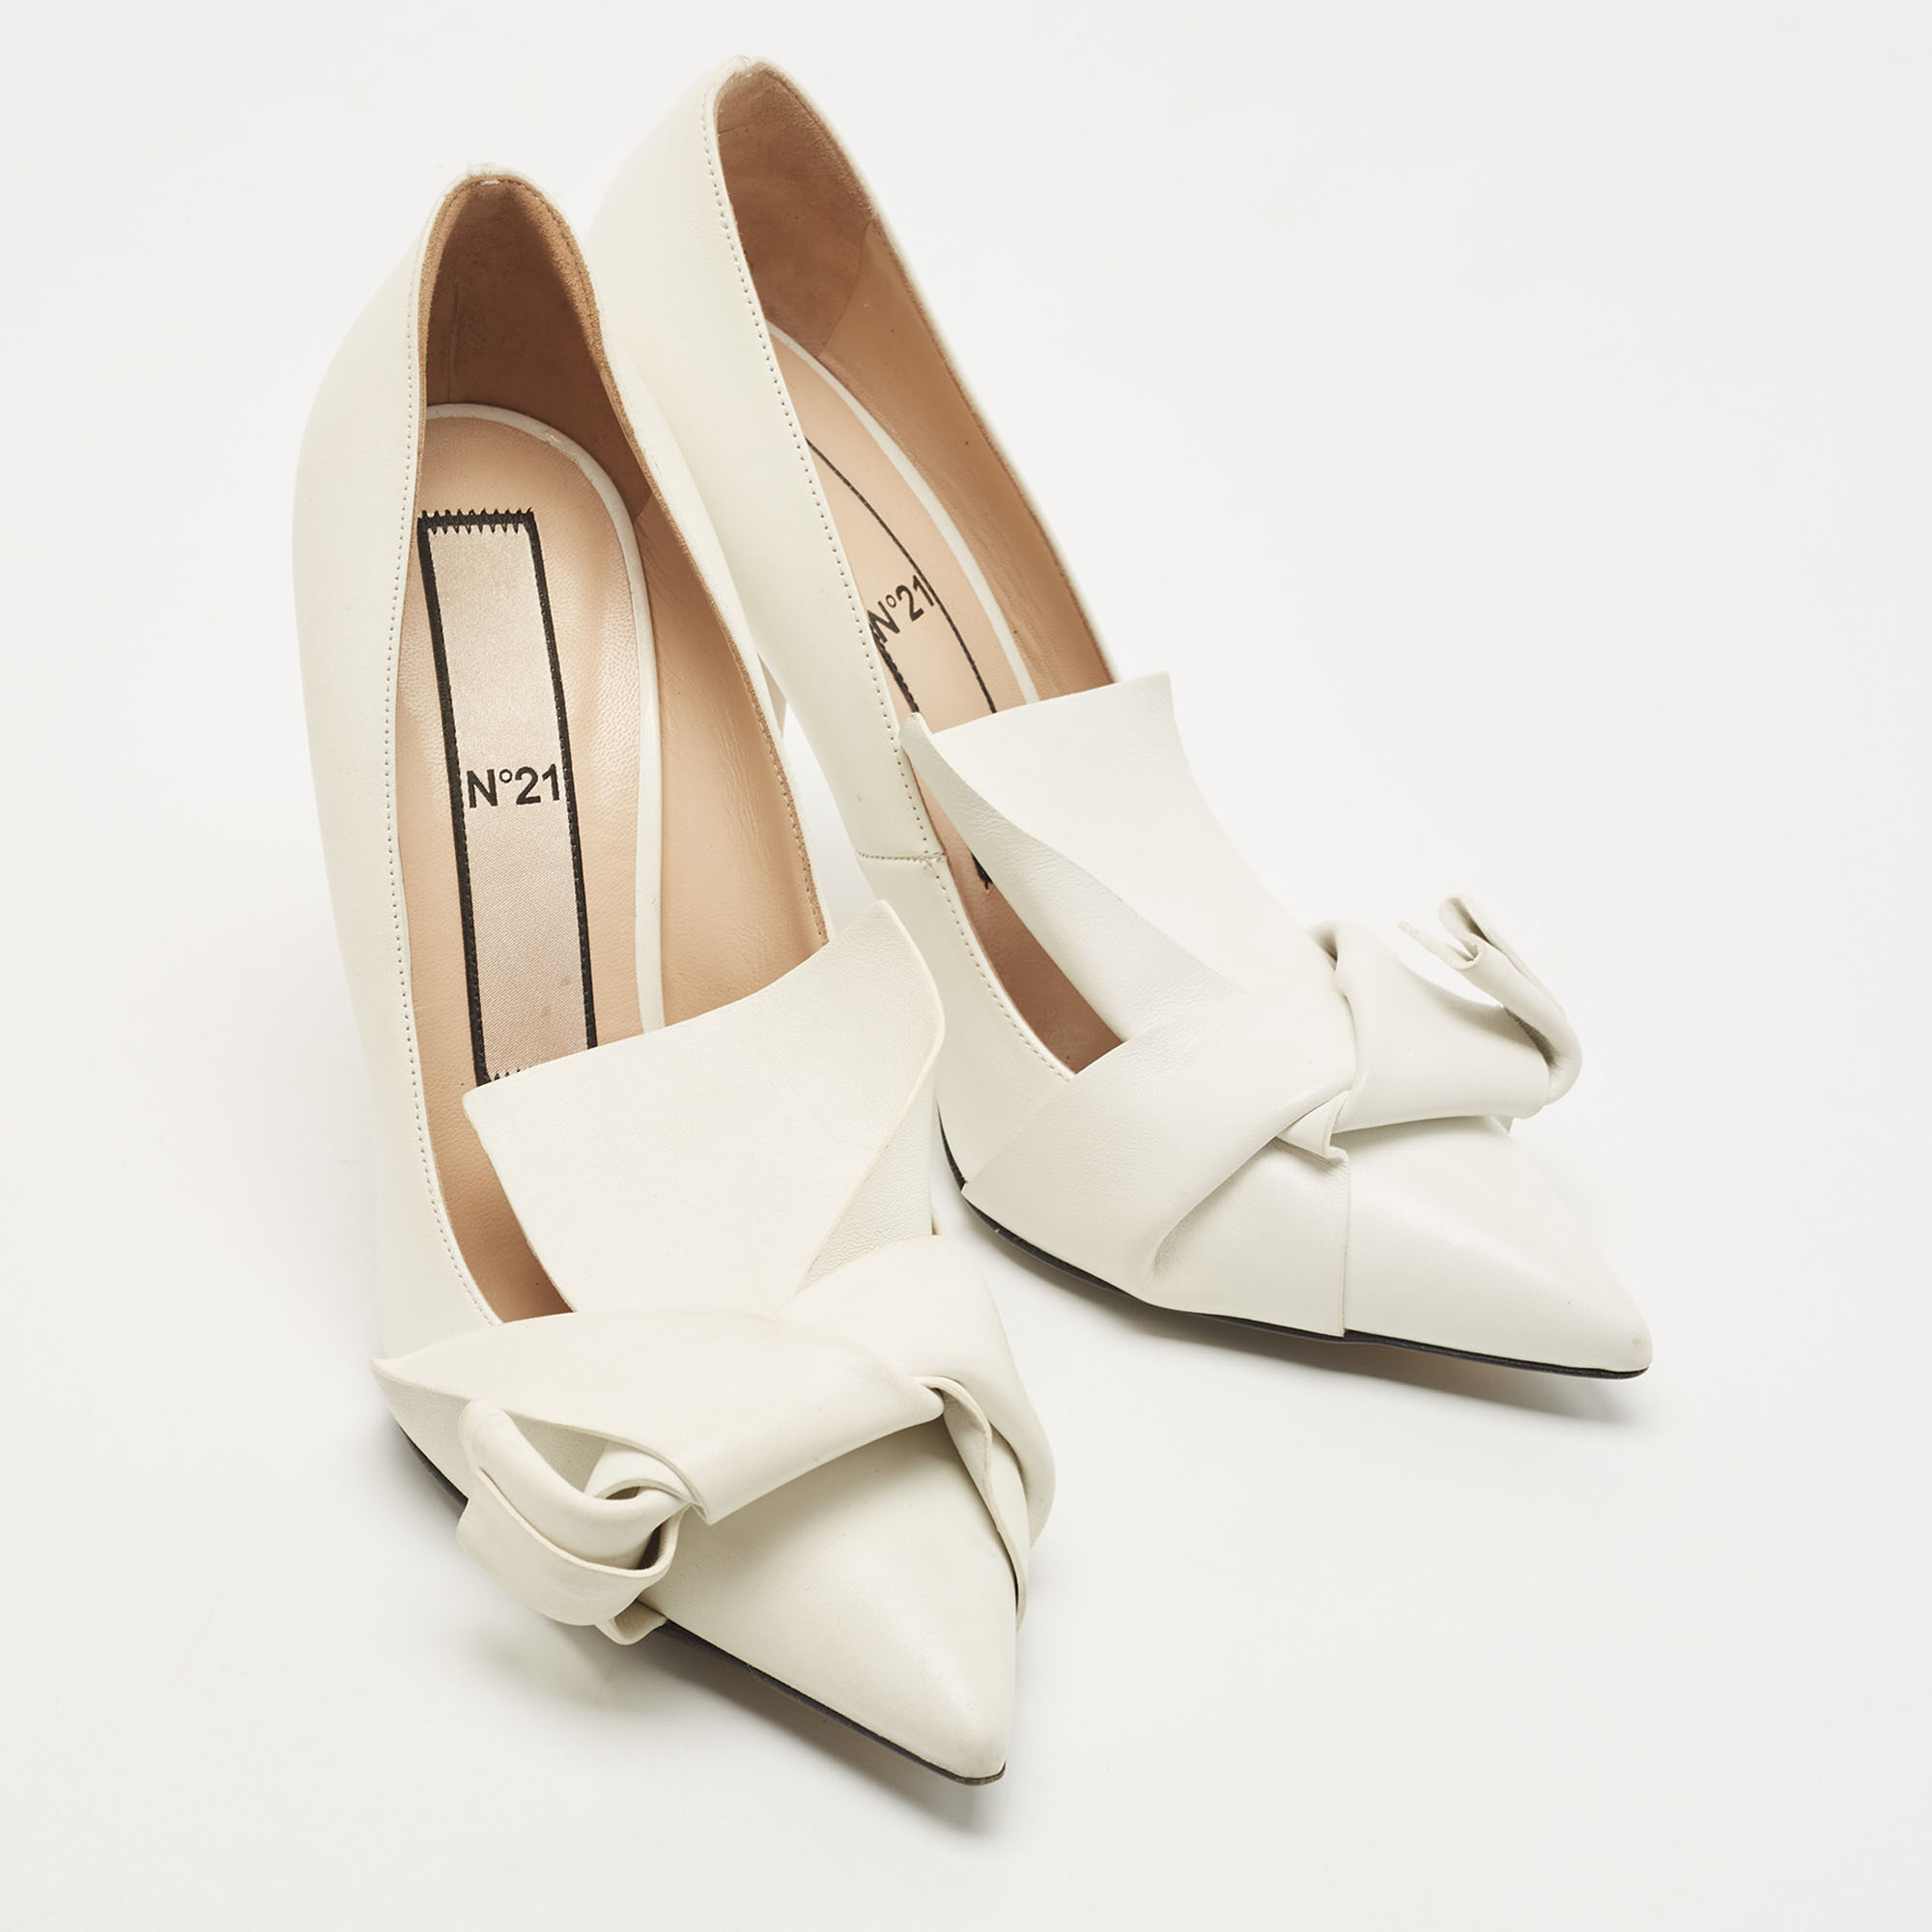 N21 White Leather Knot Pointed Toe Pump Size 40